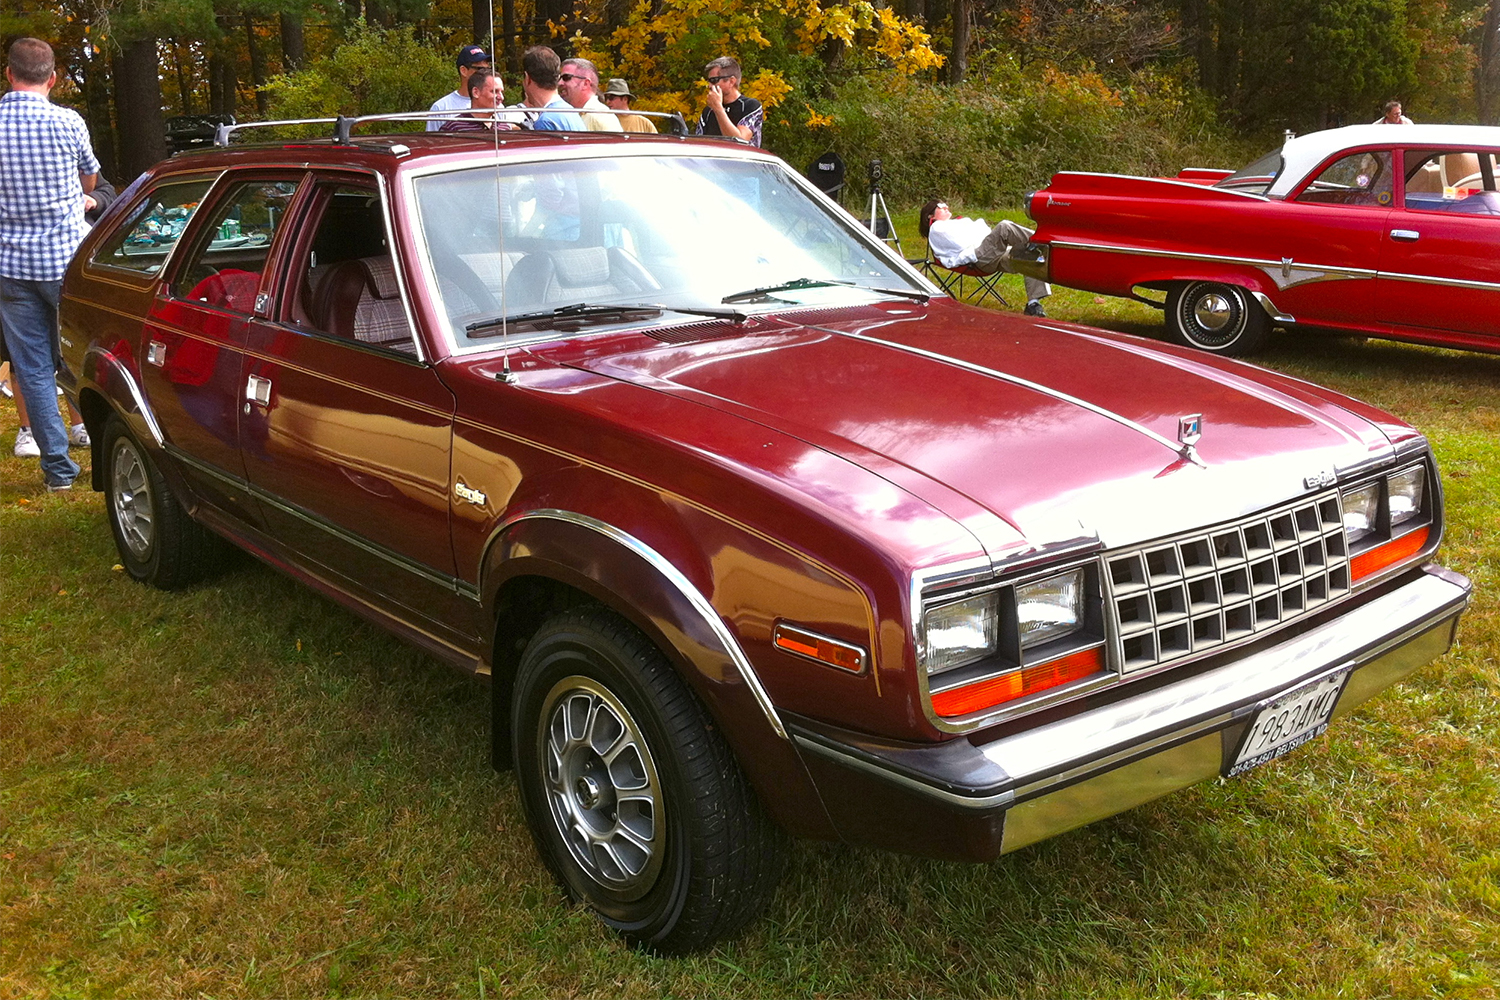 The 1983 AMC Eagle station wagon photographed in 2012